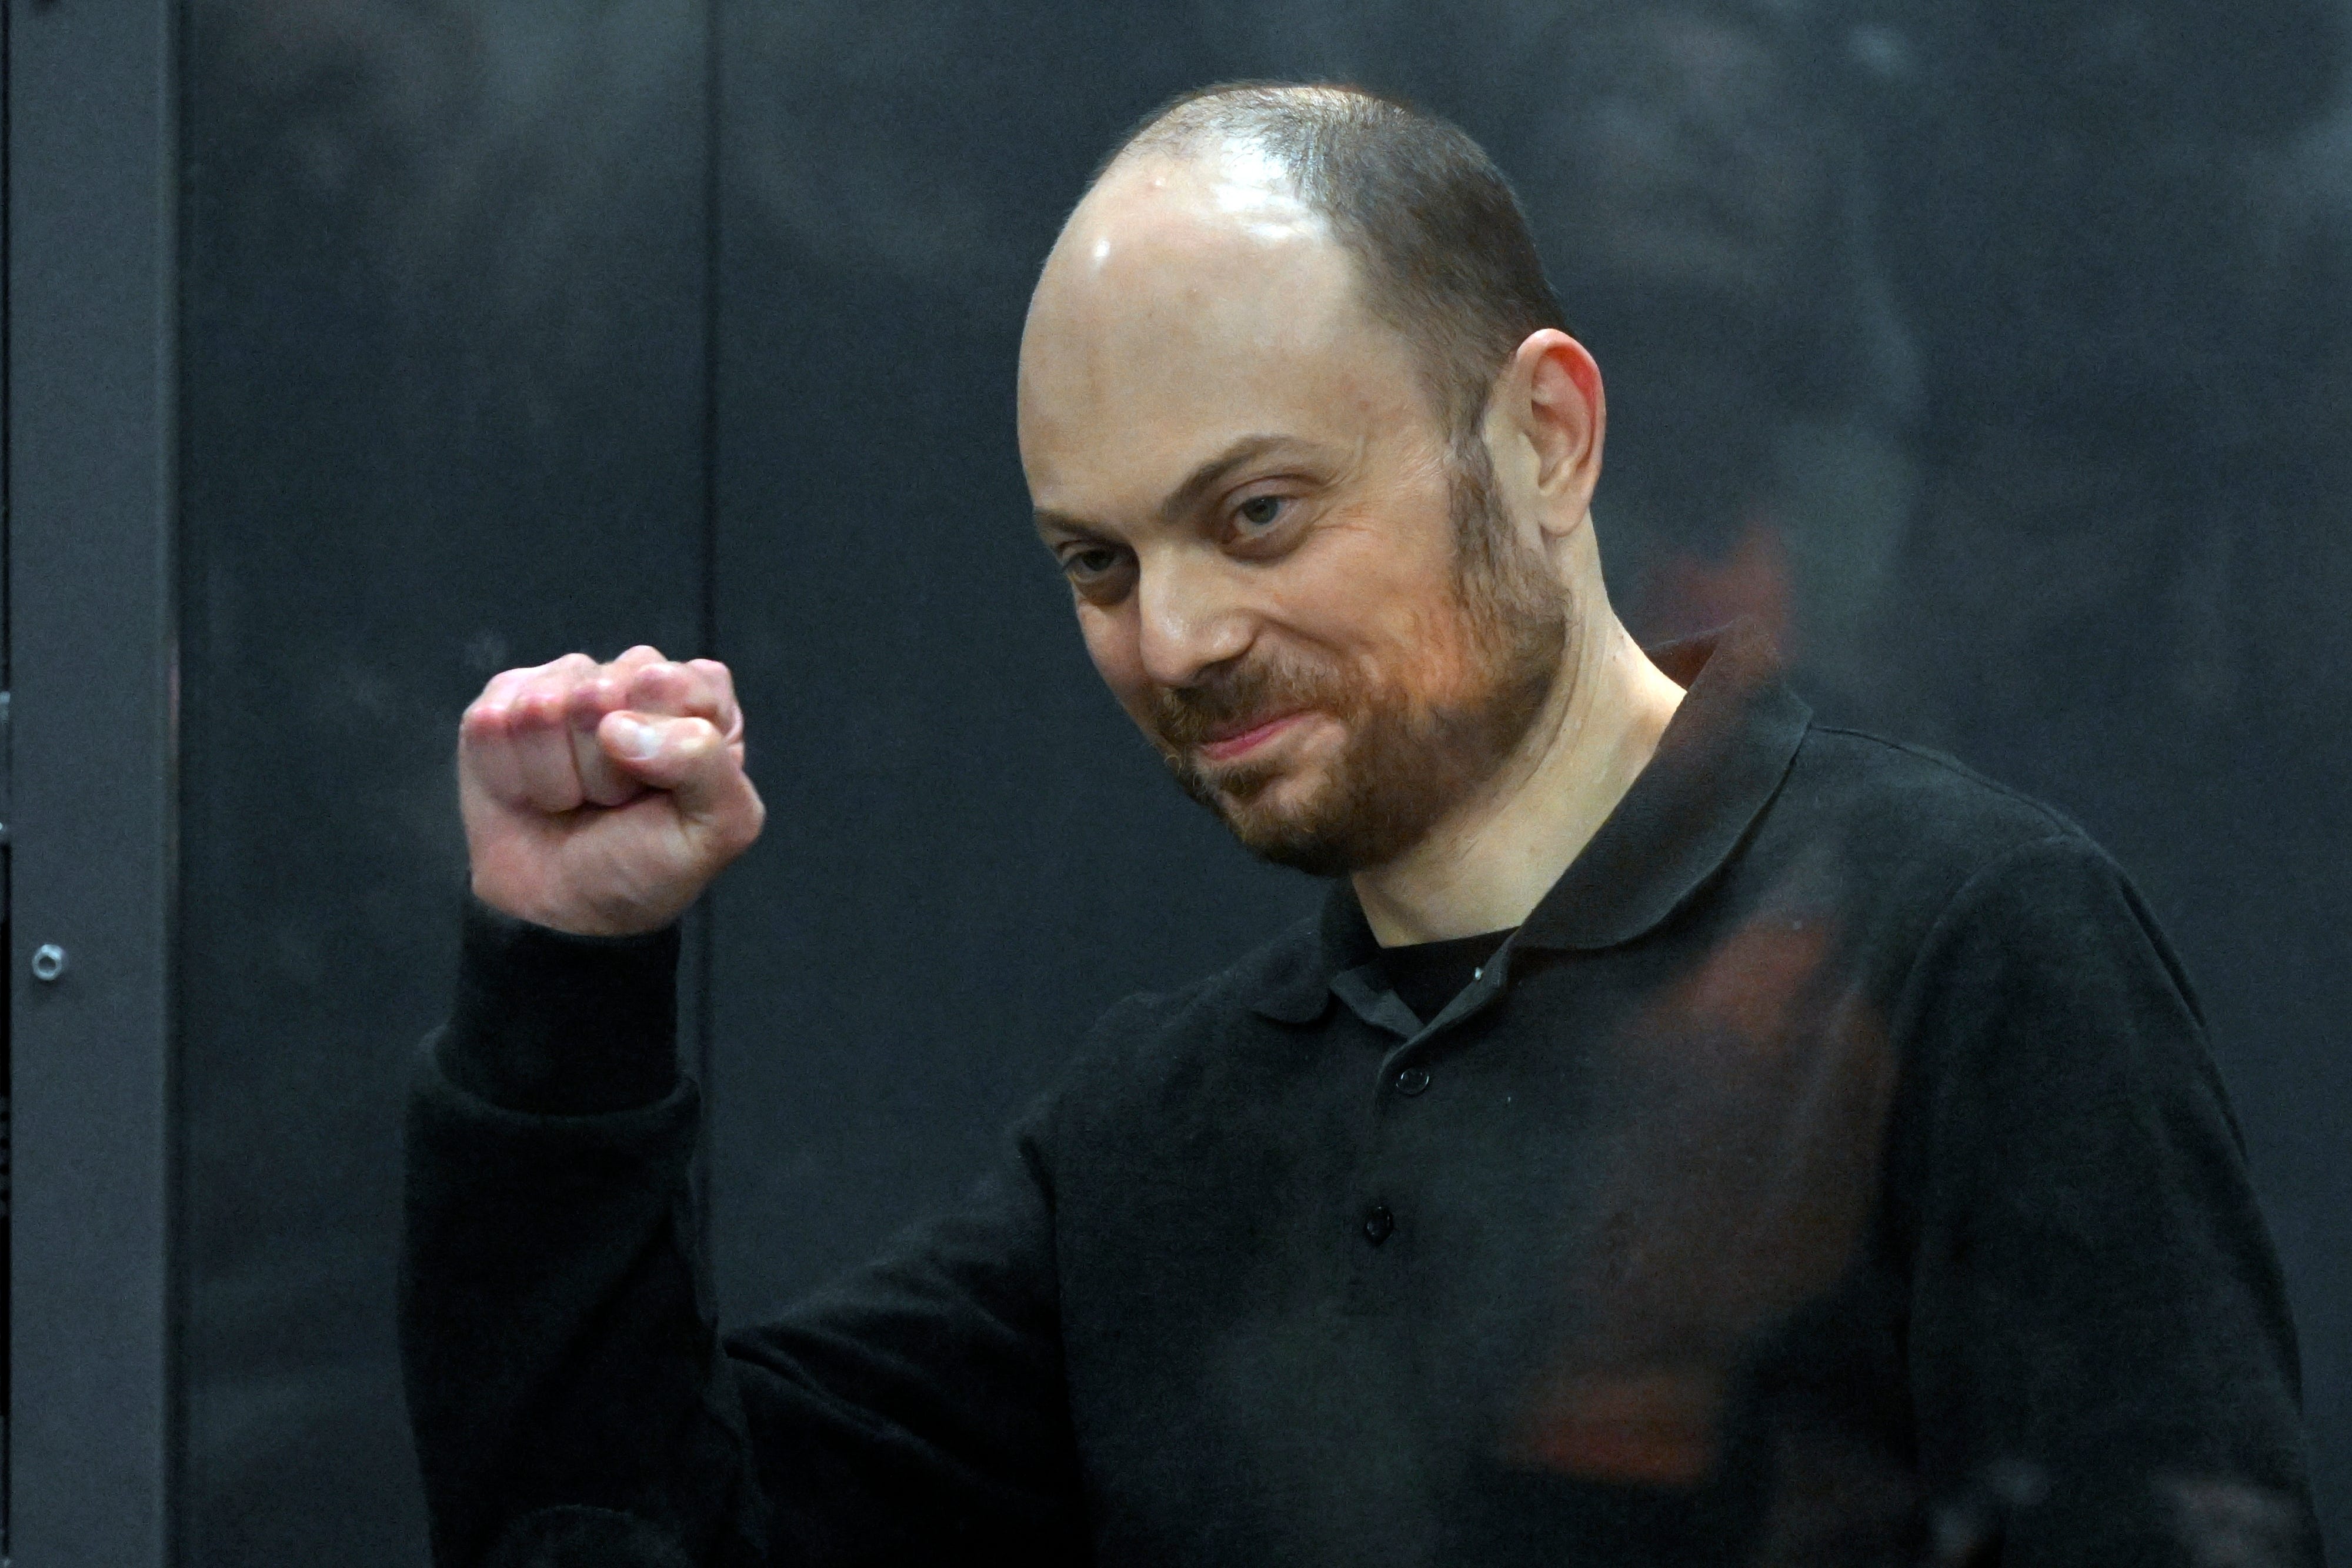 Russian opposition activist Vladimir Kara-Murza during his trial in Moscow